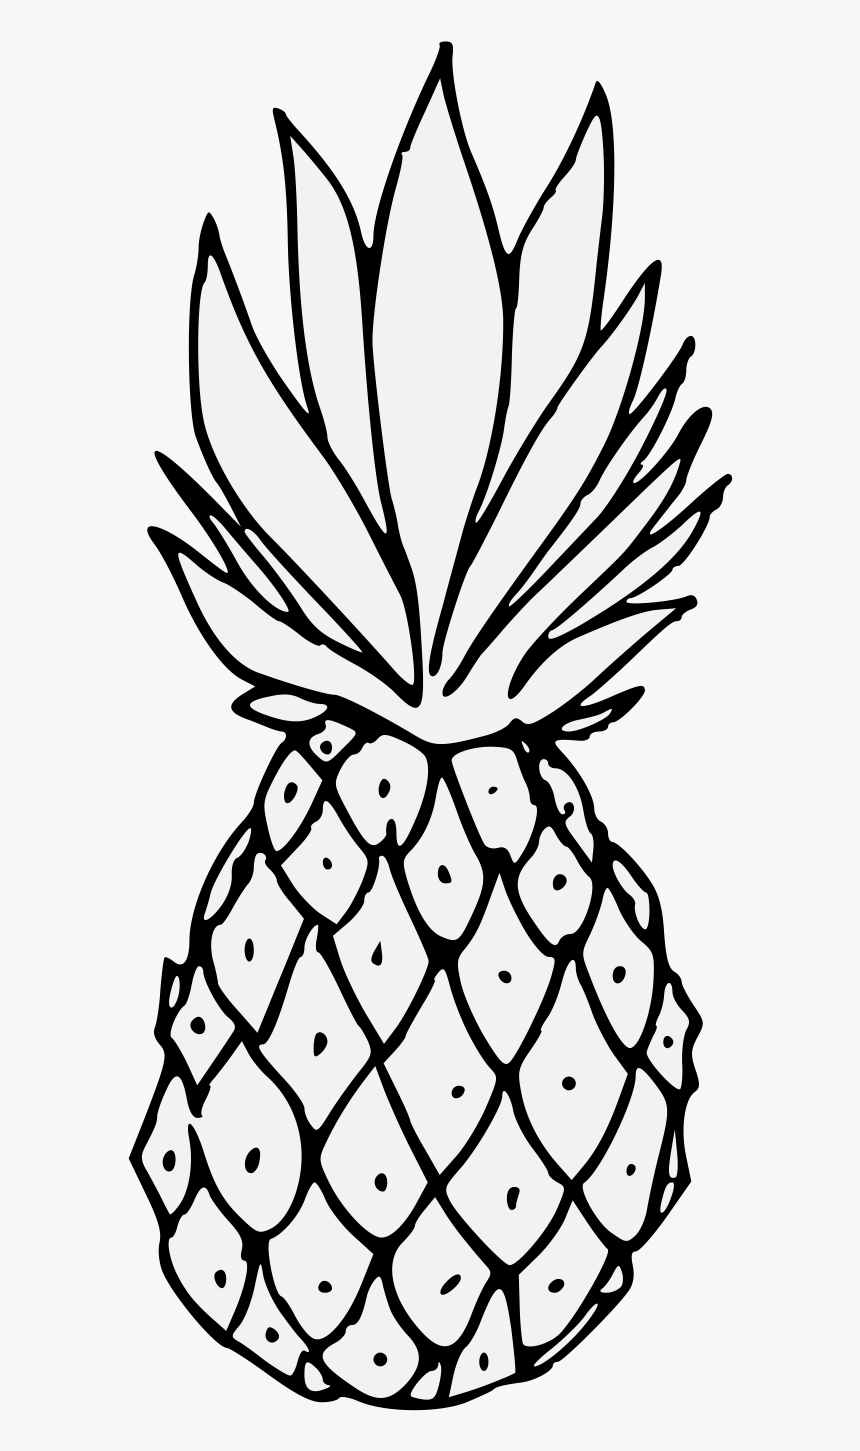 Pineapple in graphite : r/drawing